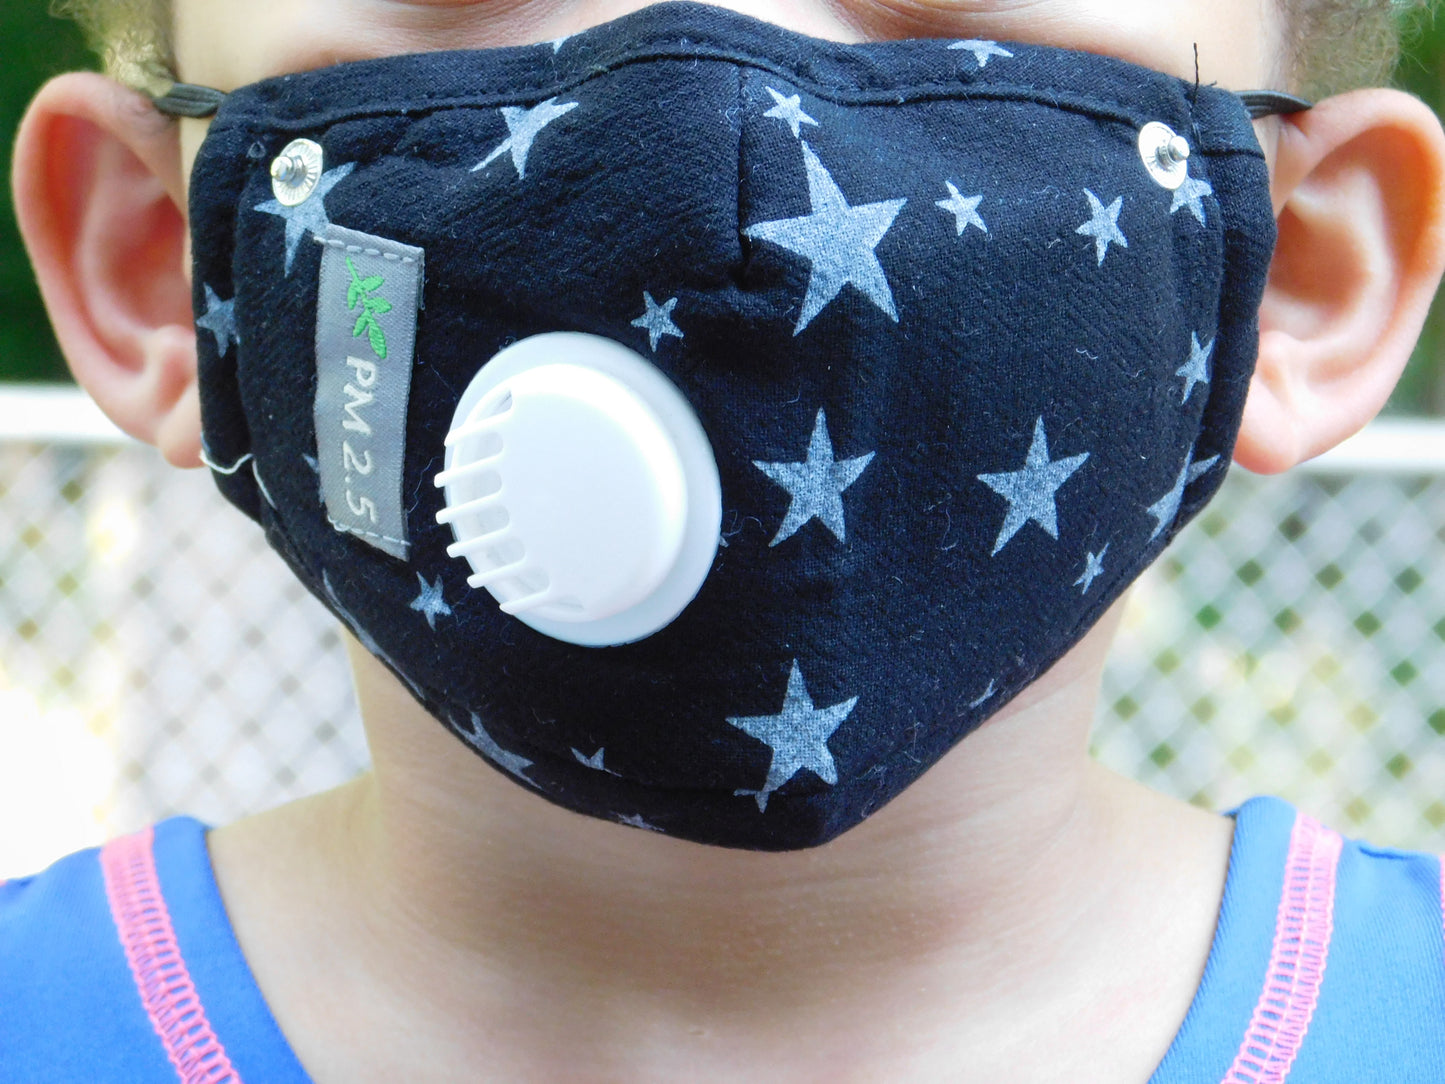 Kids Adjustable Face Mask With Shield, Filter Pocket & 2 Filters. Next Day Shipping